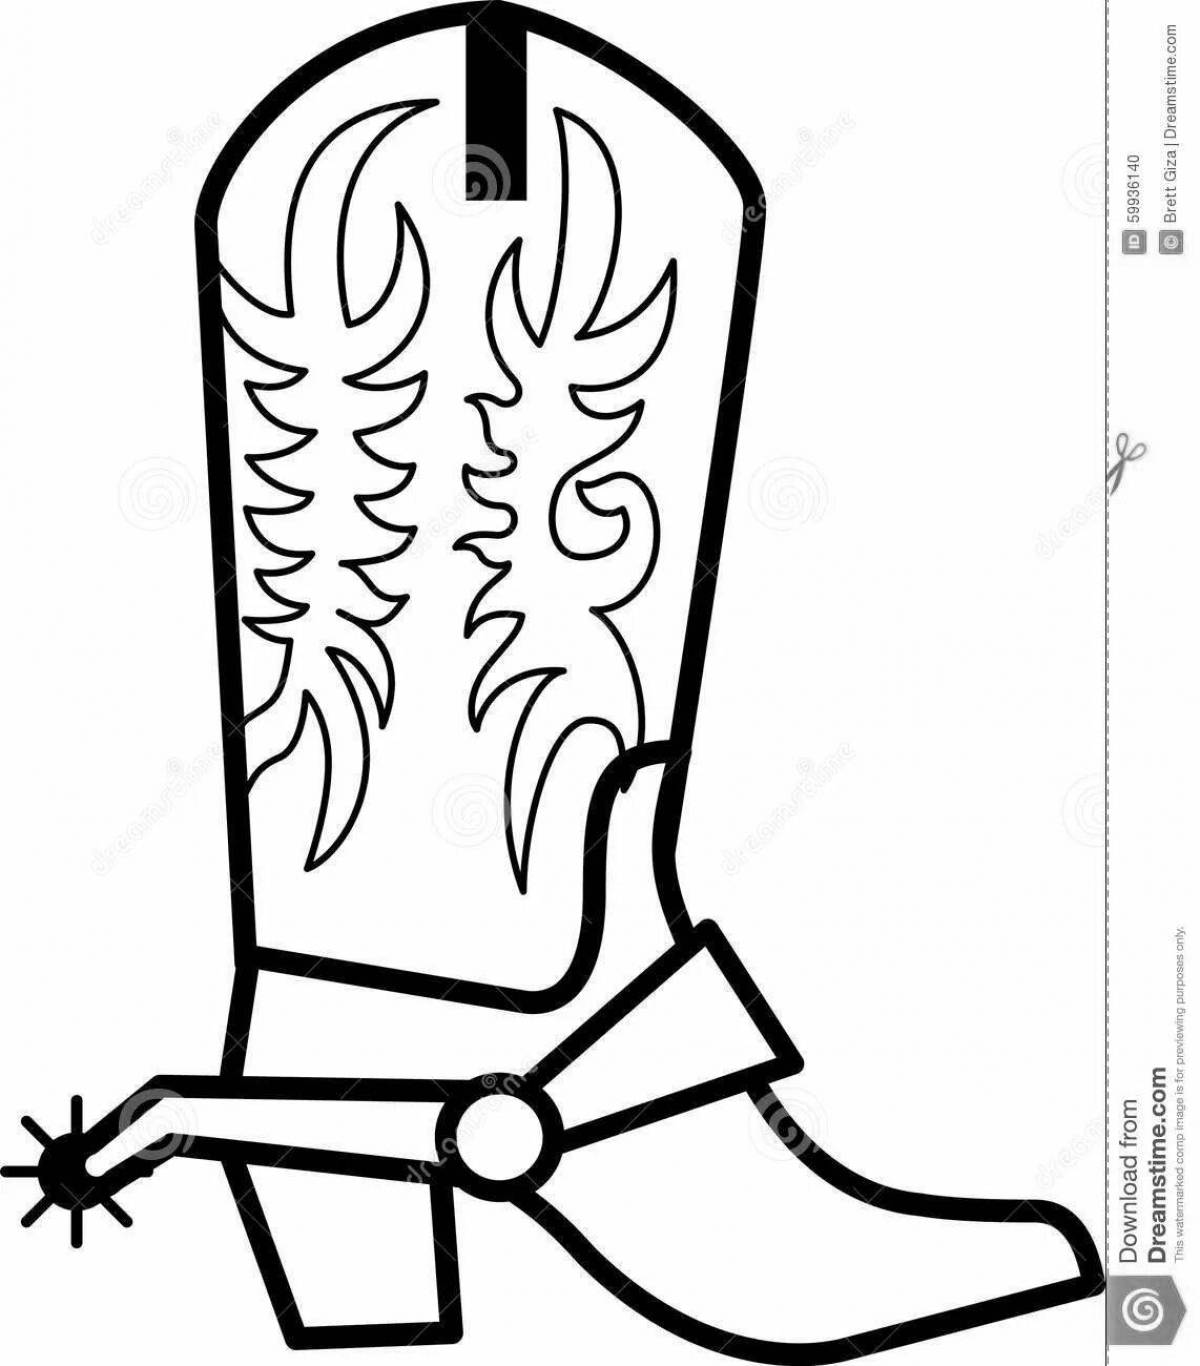 Amazing walking boots coloring page